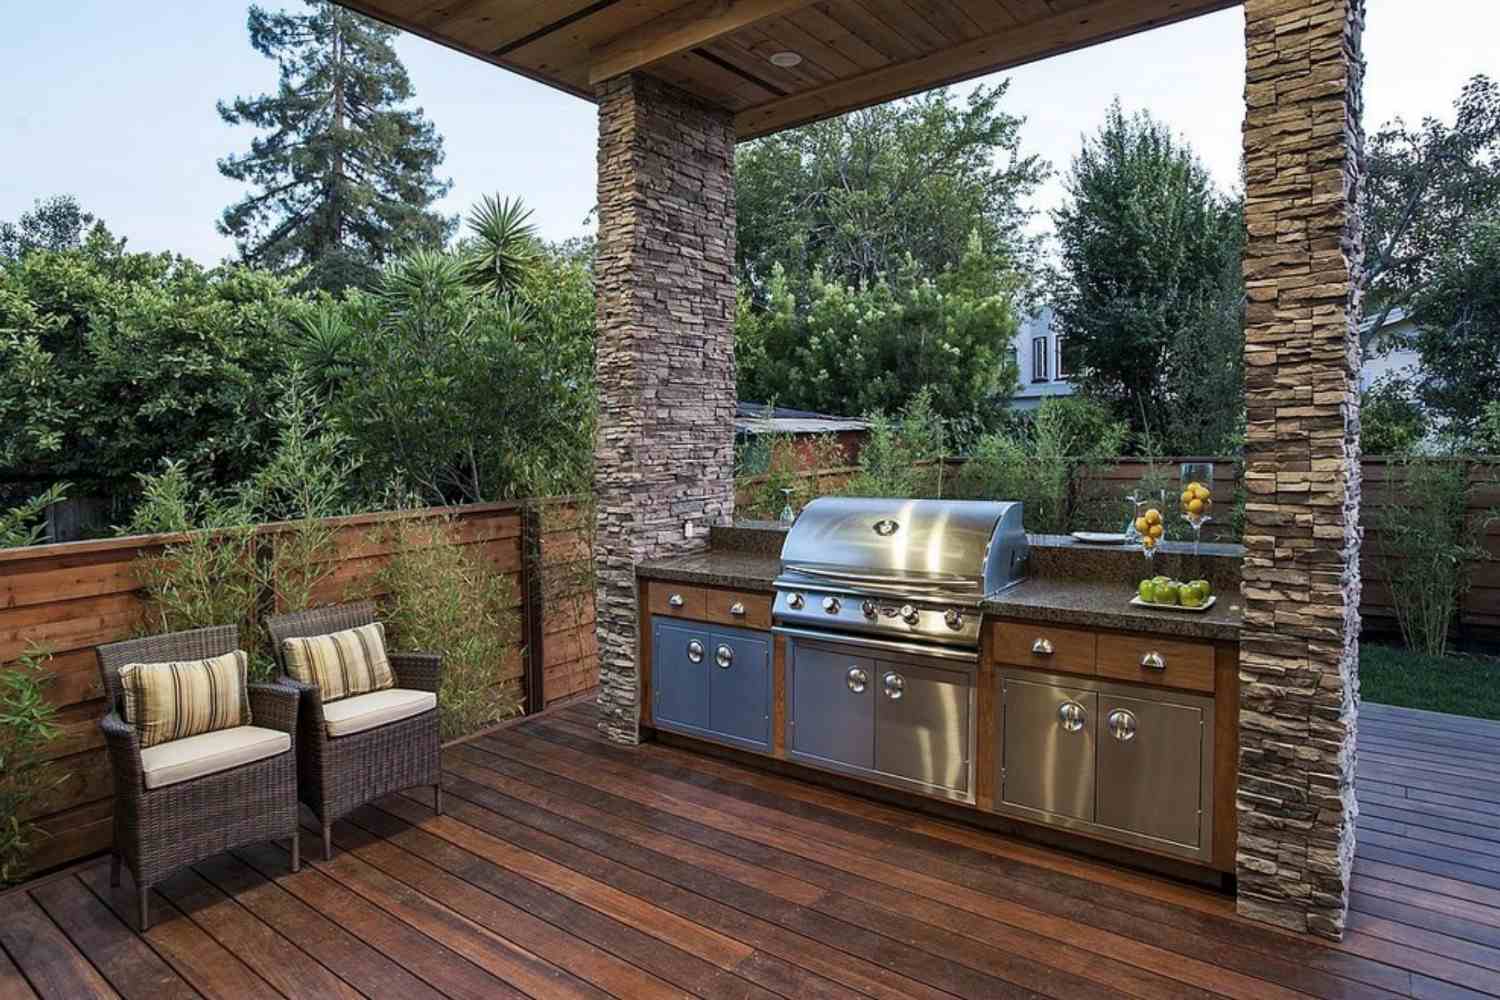 Where to Place a Firepit in the Backyard